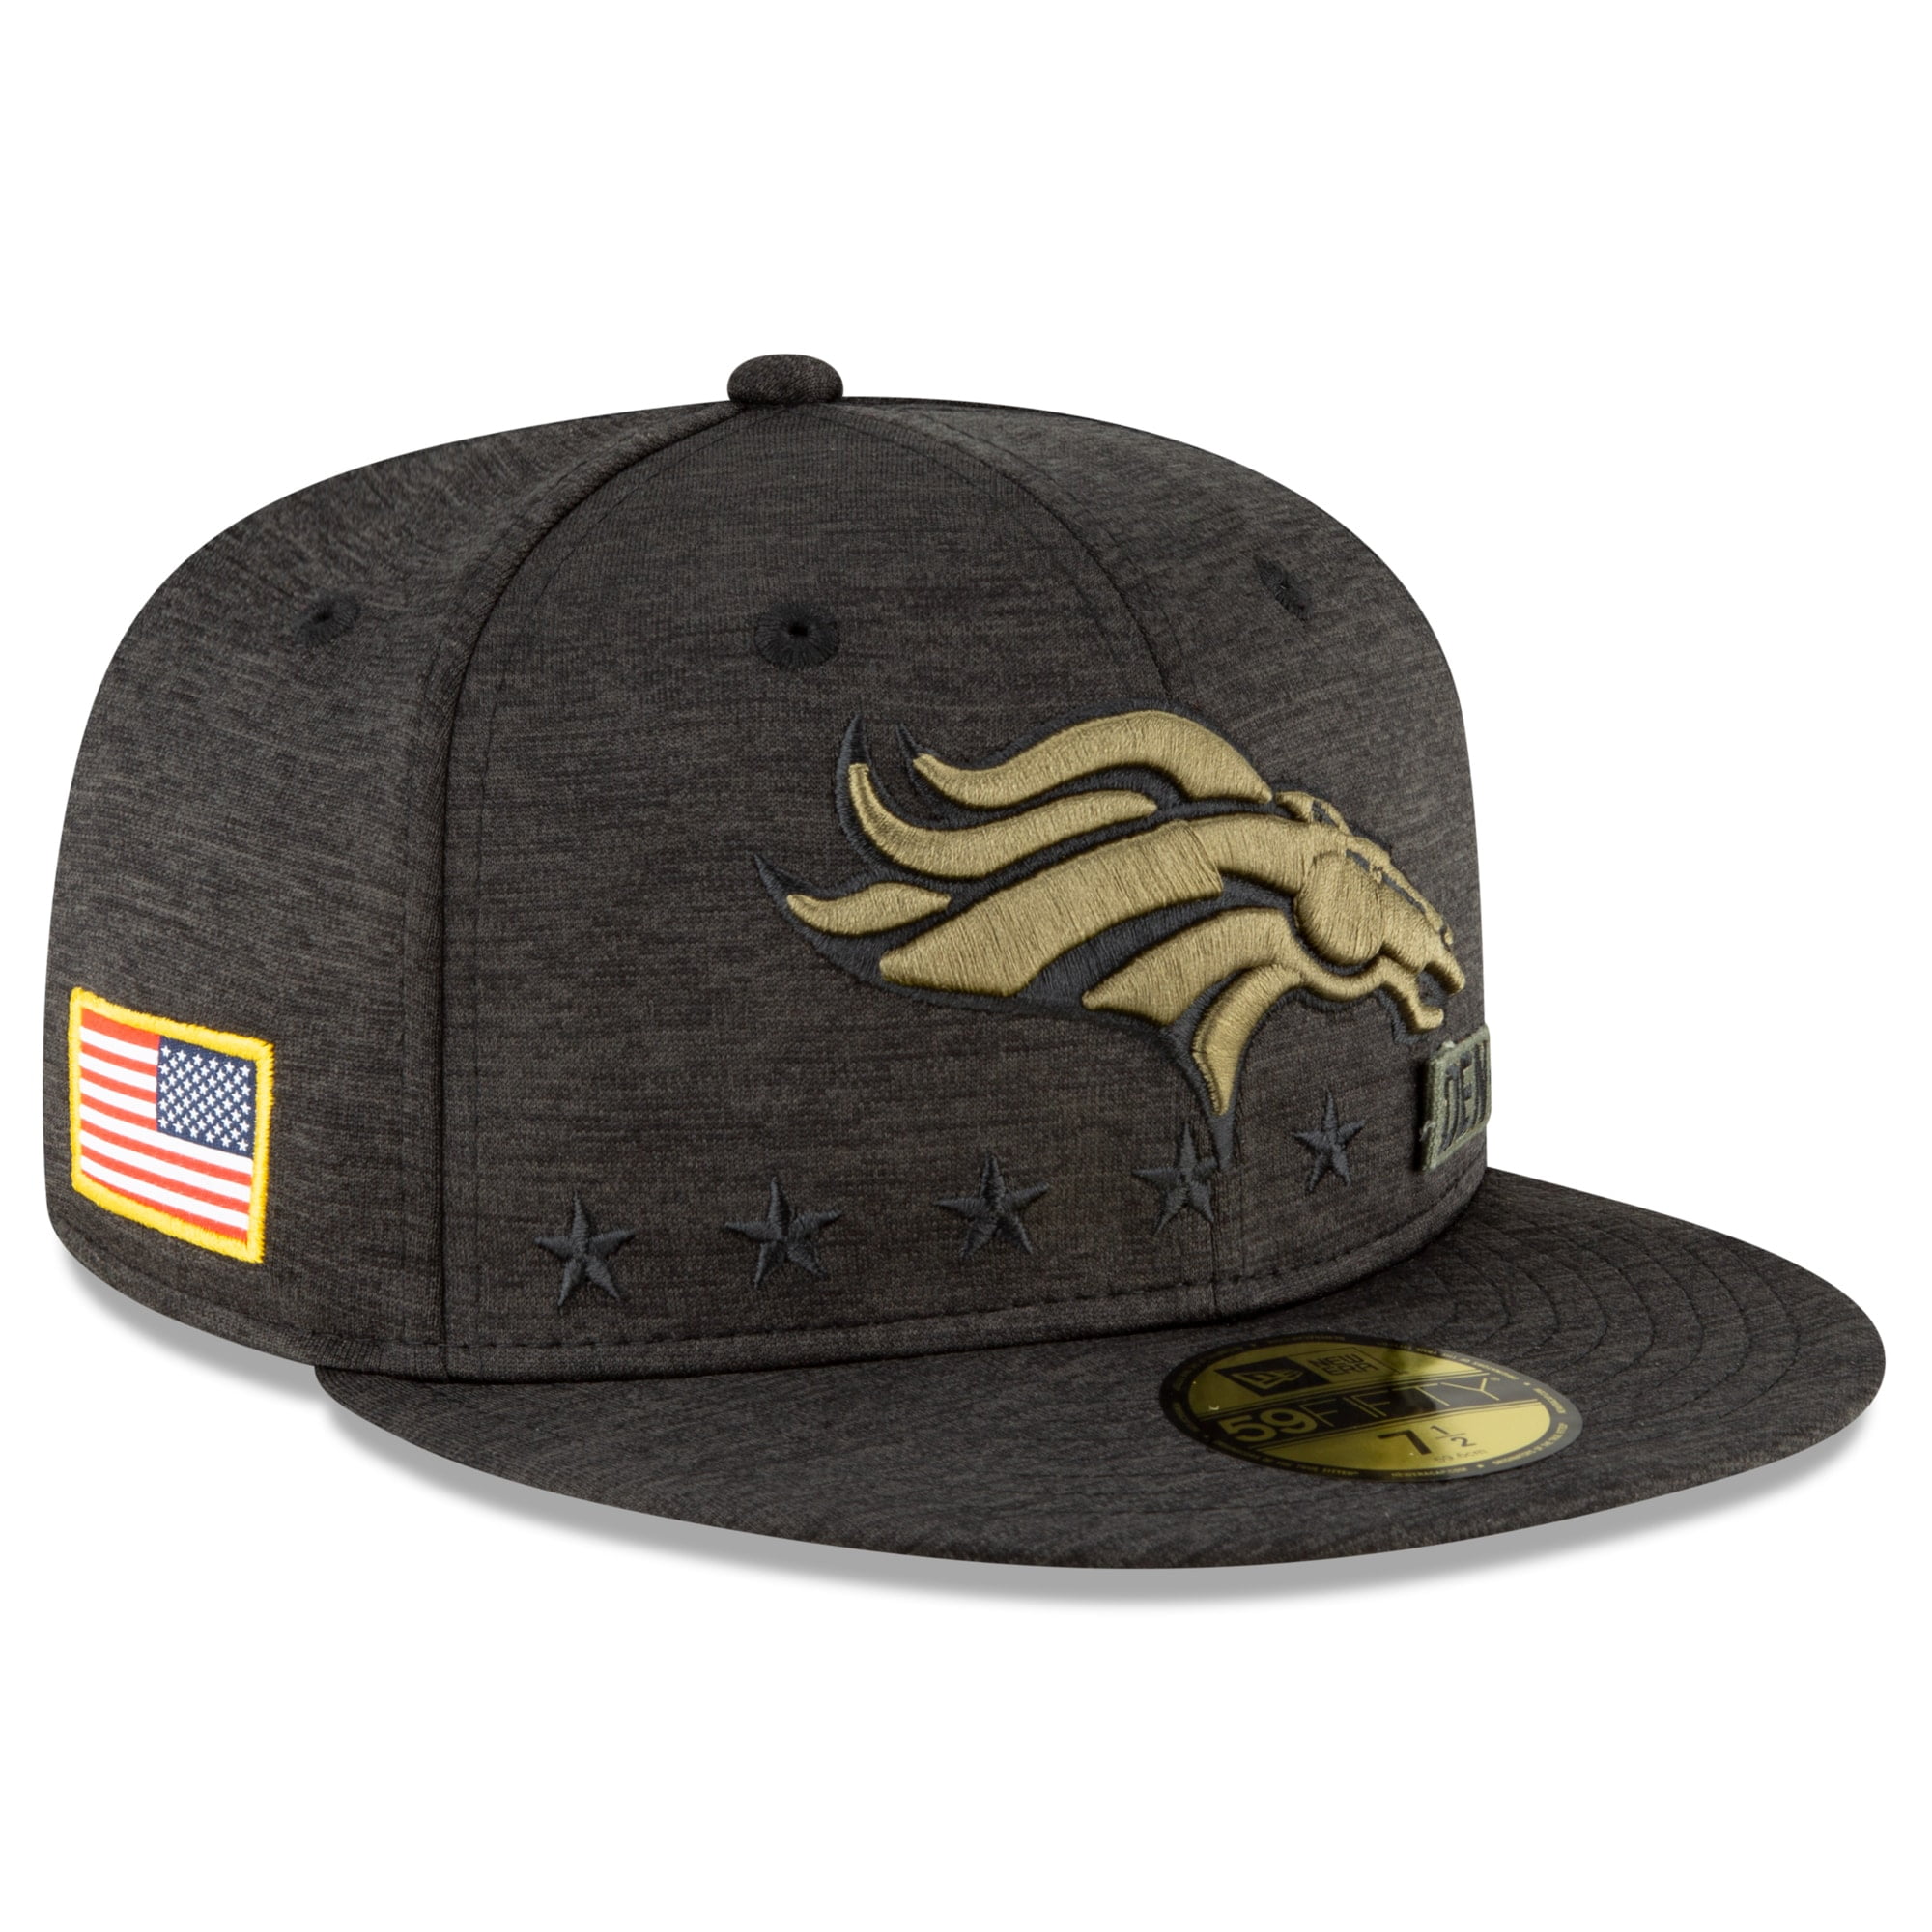 nfl salute to service hats 2016